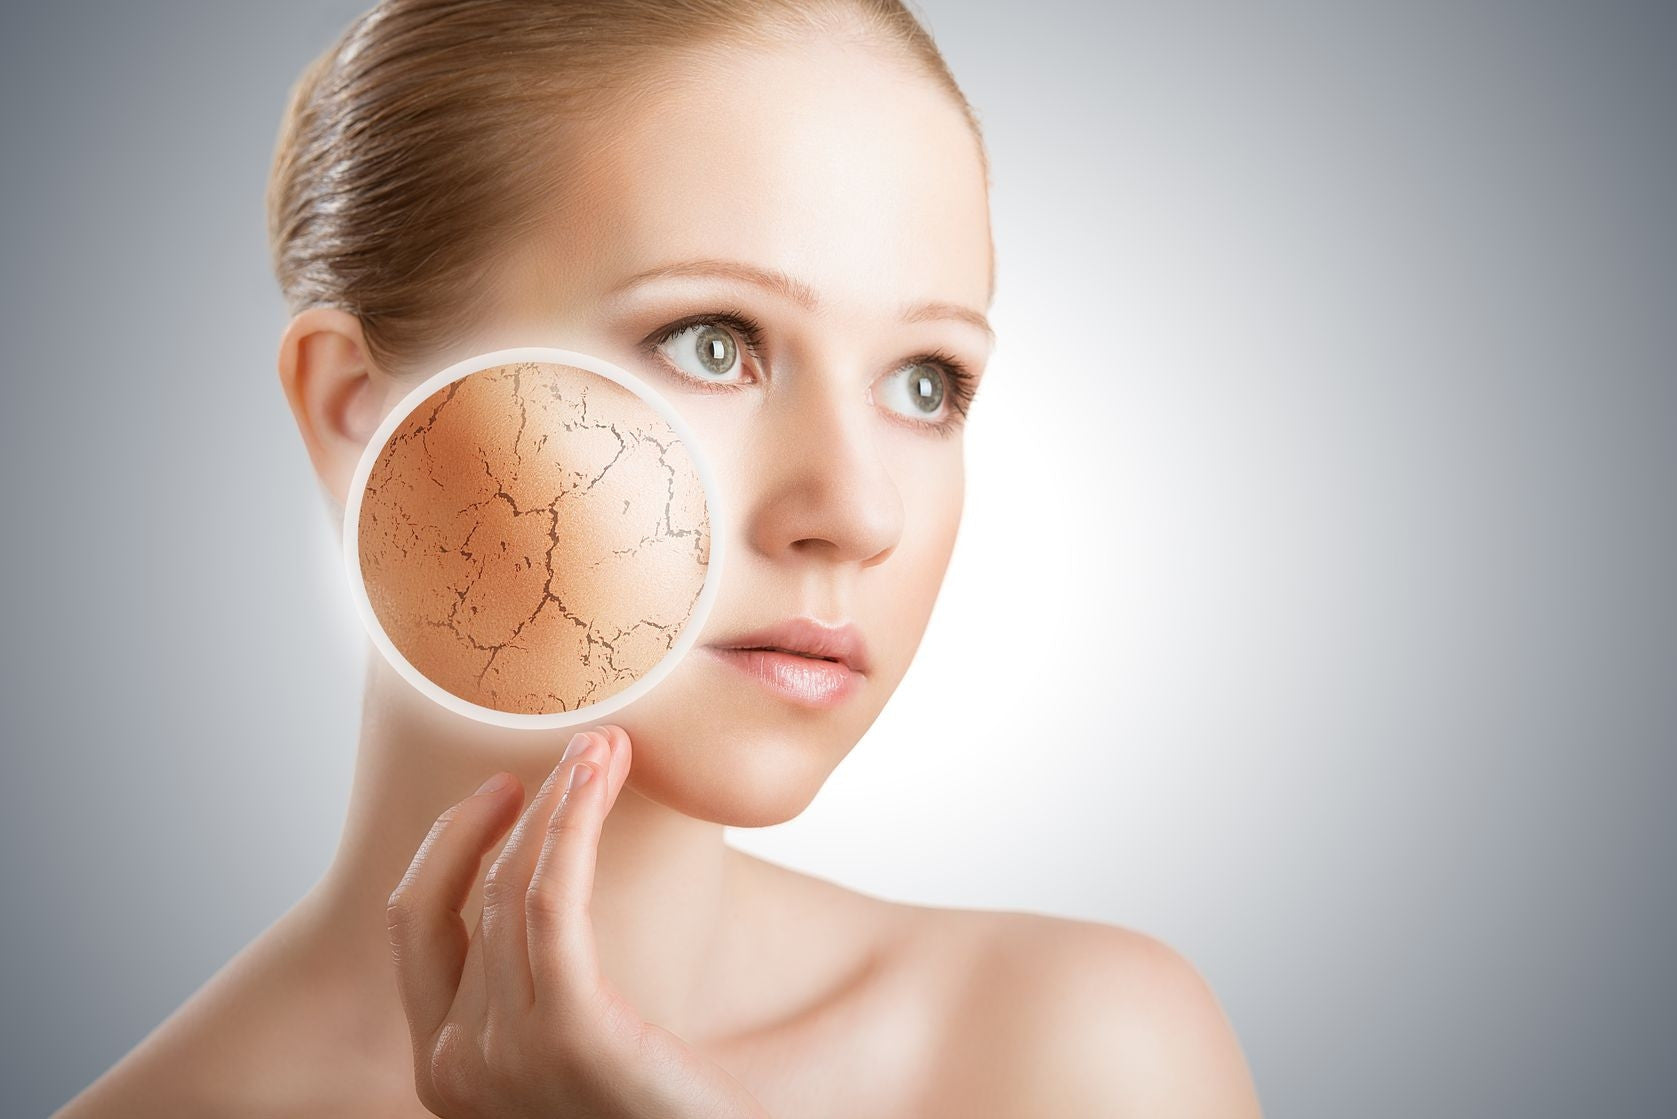 5 Reasons Why Your Skin May Be Dry